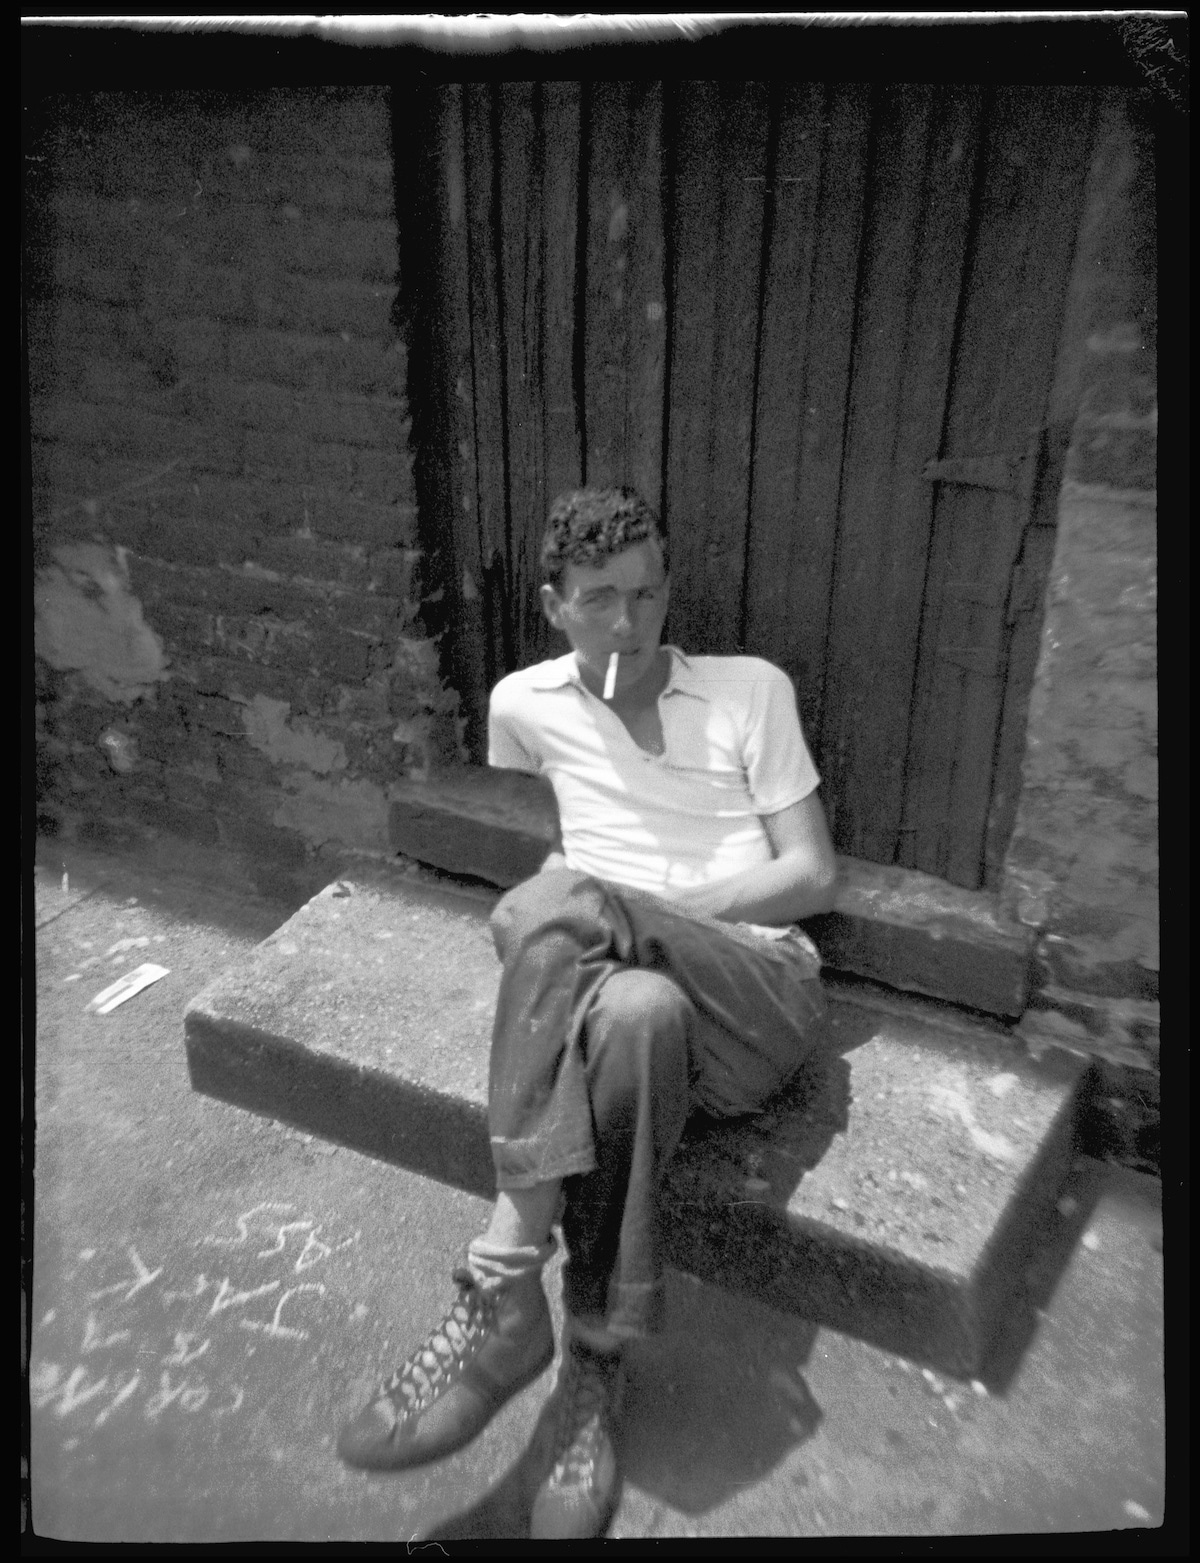 Man in Chicago in the 1930s with a Cigarette in His Mouth